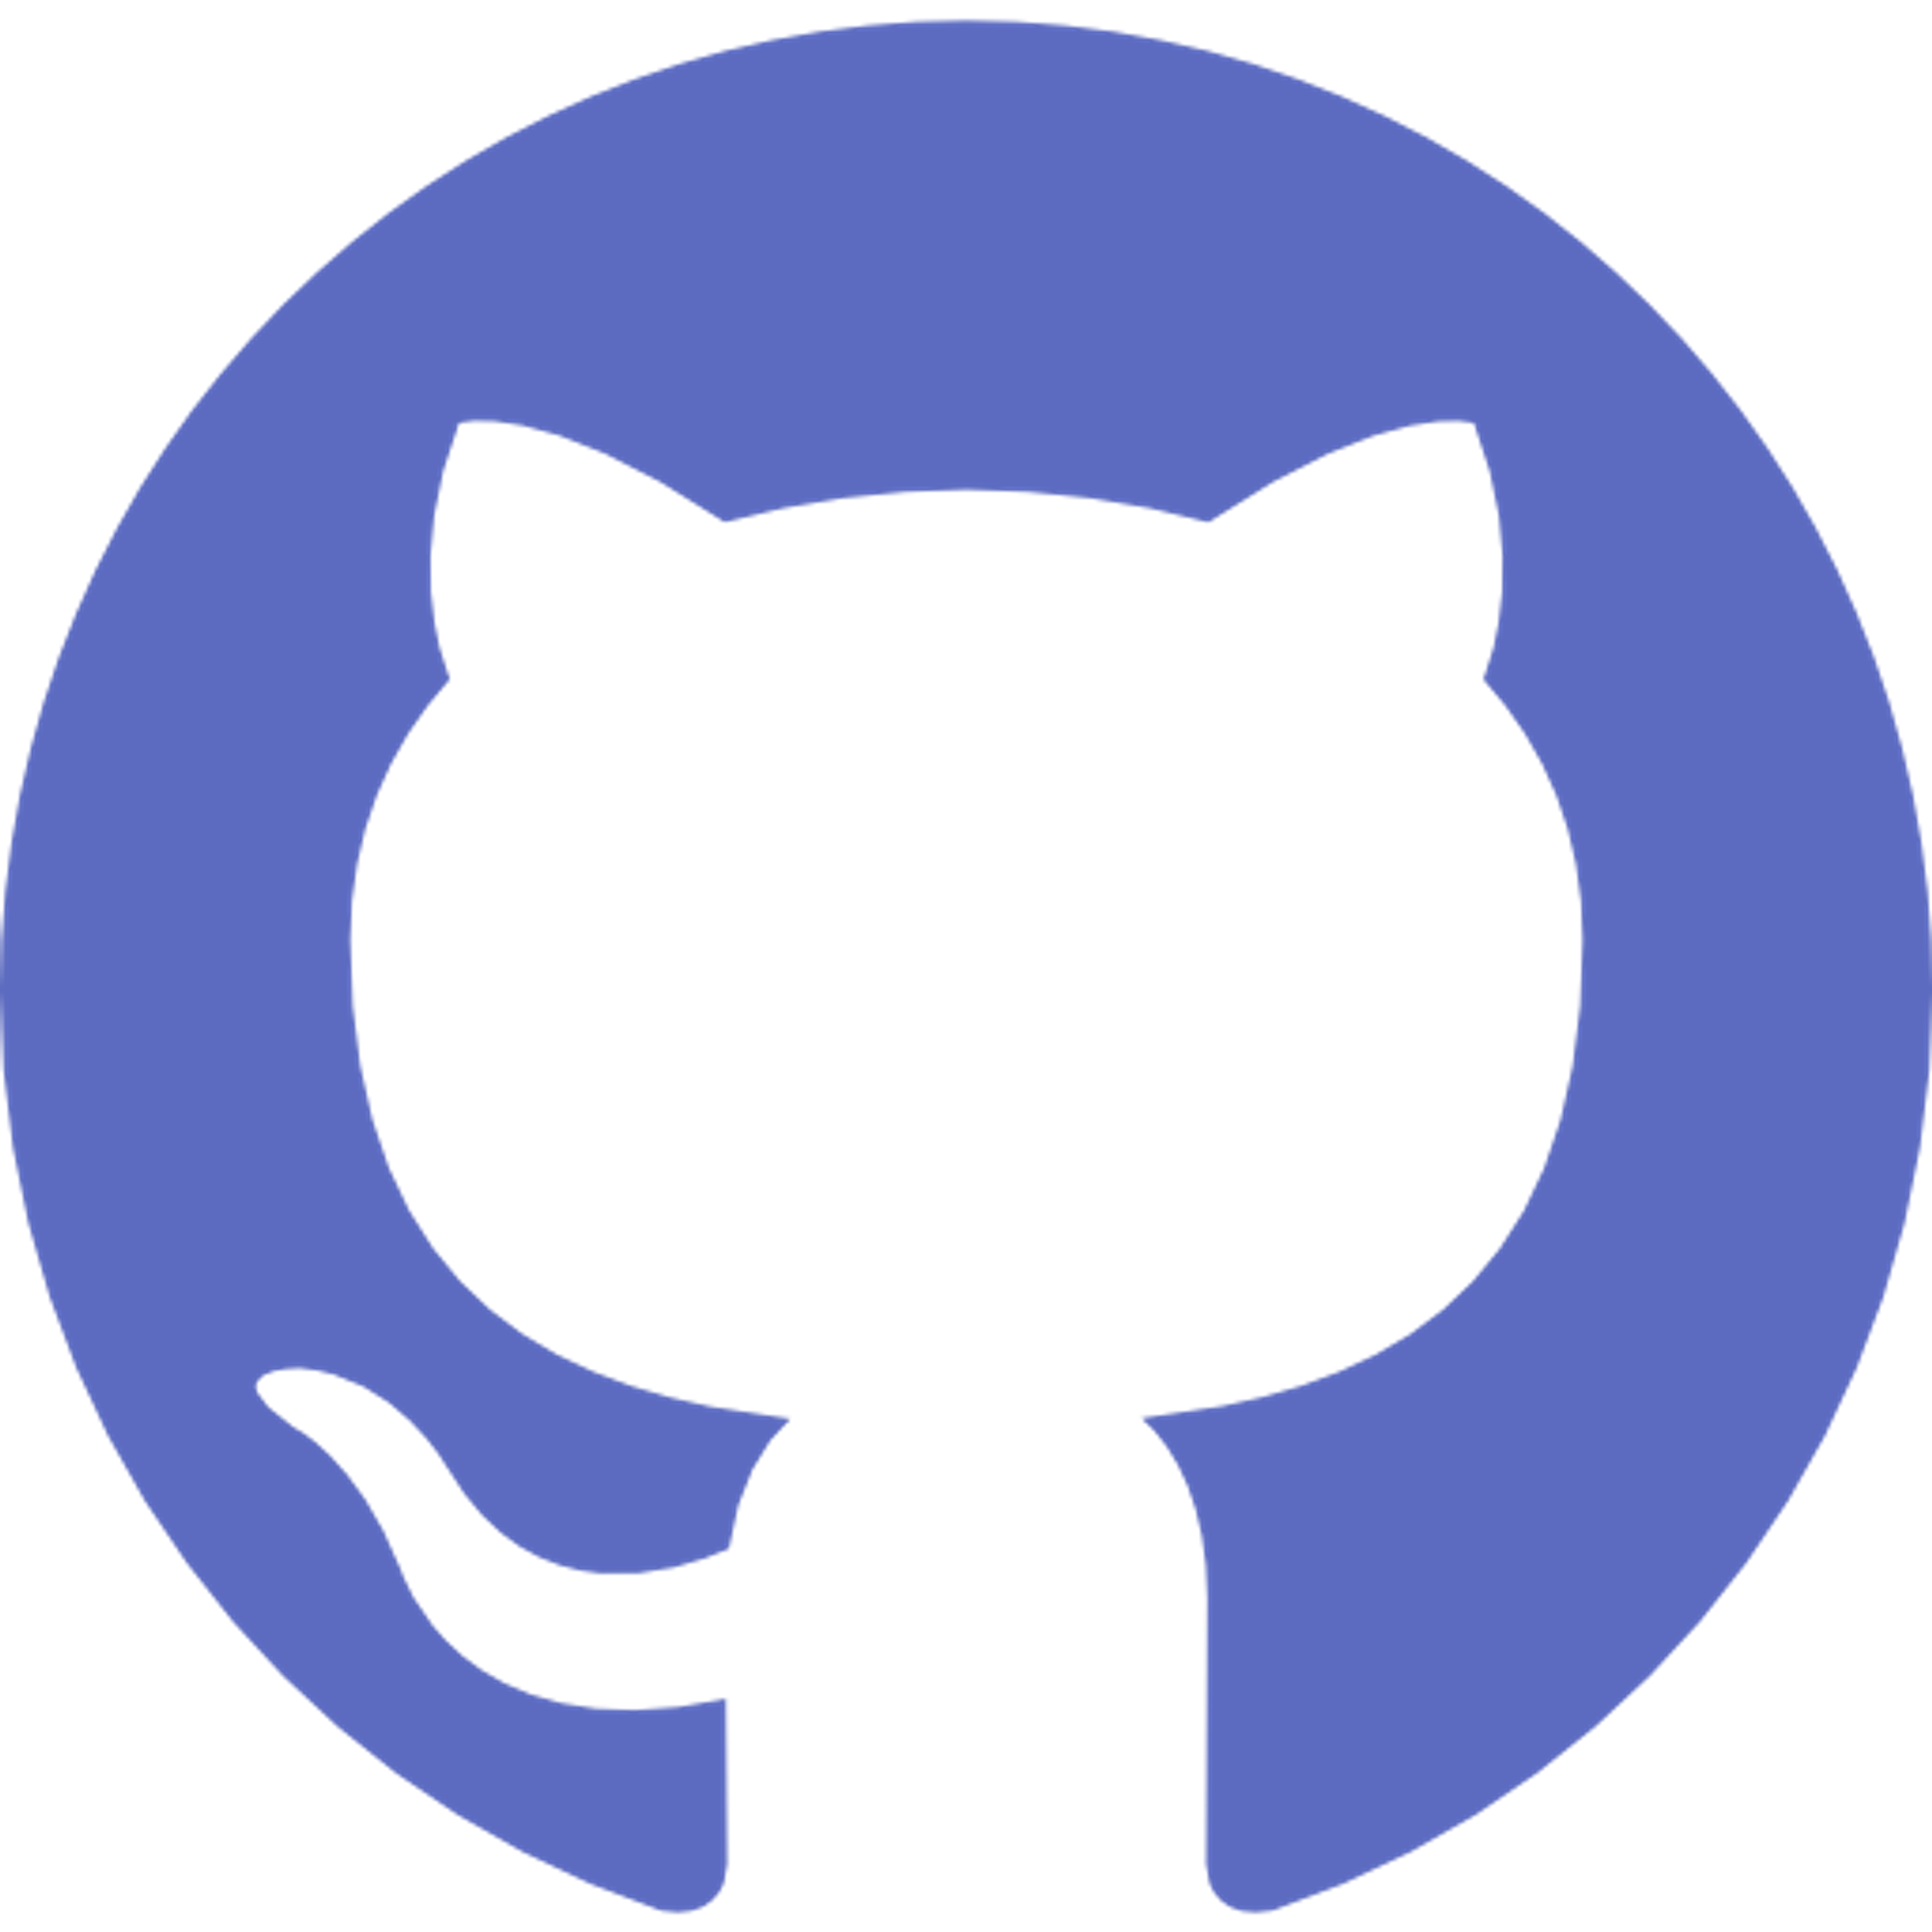 Learning Github 101: Creating your first Repository